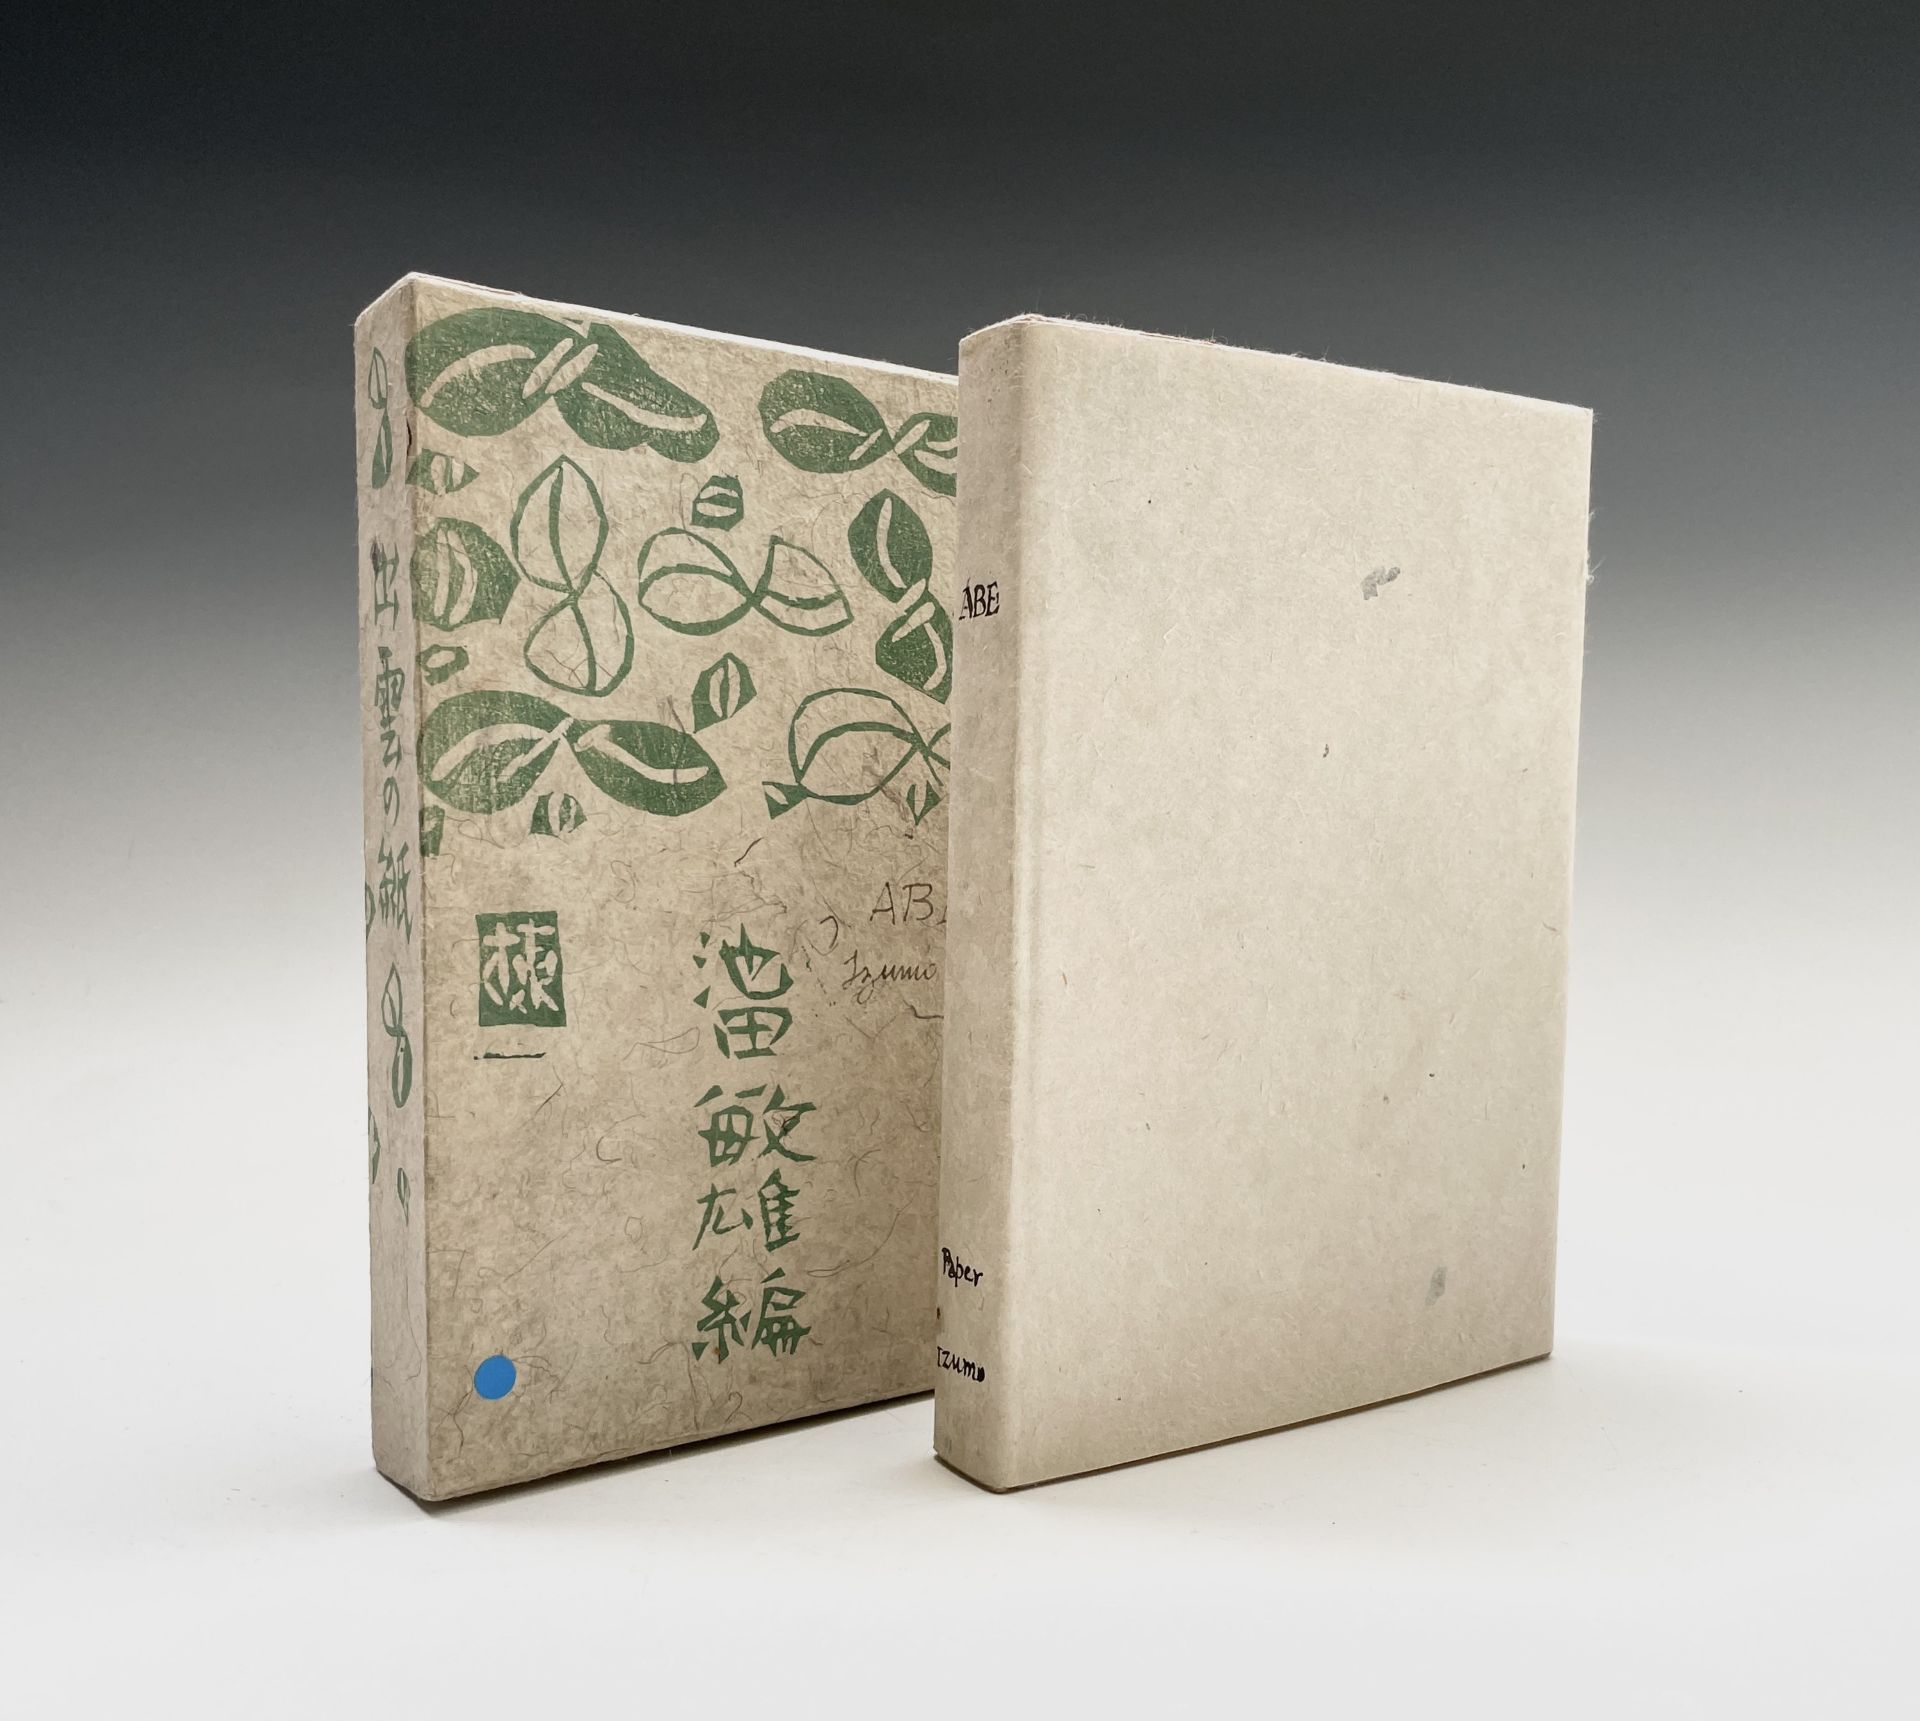 EISHIRO ABE. 'The Hand Made Paper of Izumo.' Hand-printed paper-covered boards, hand-made paper